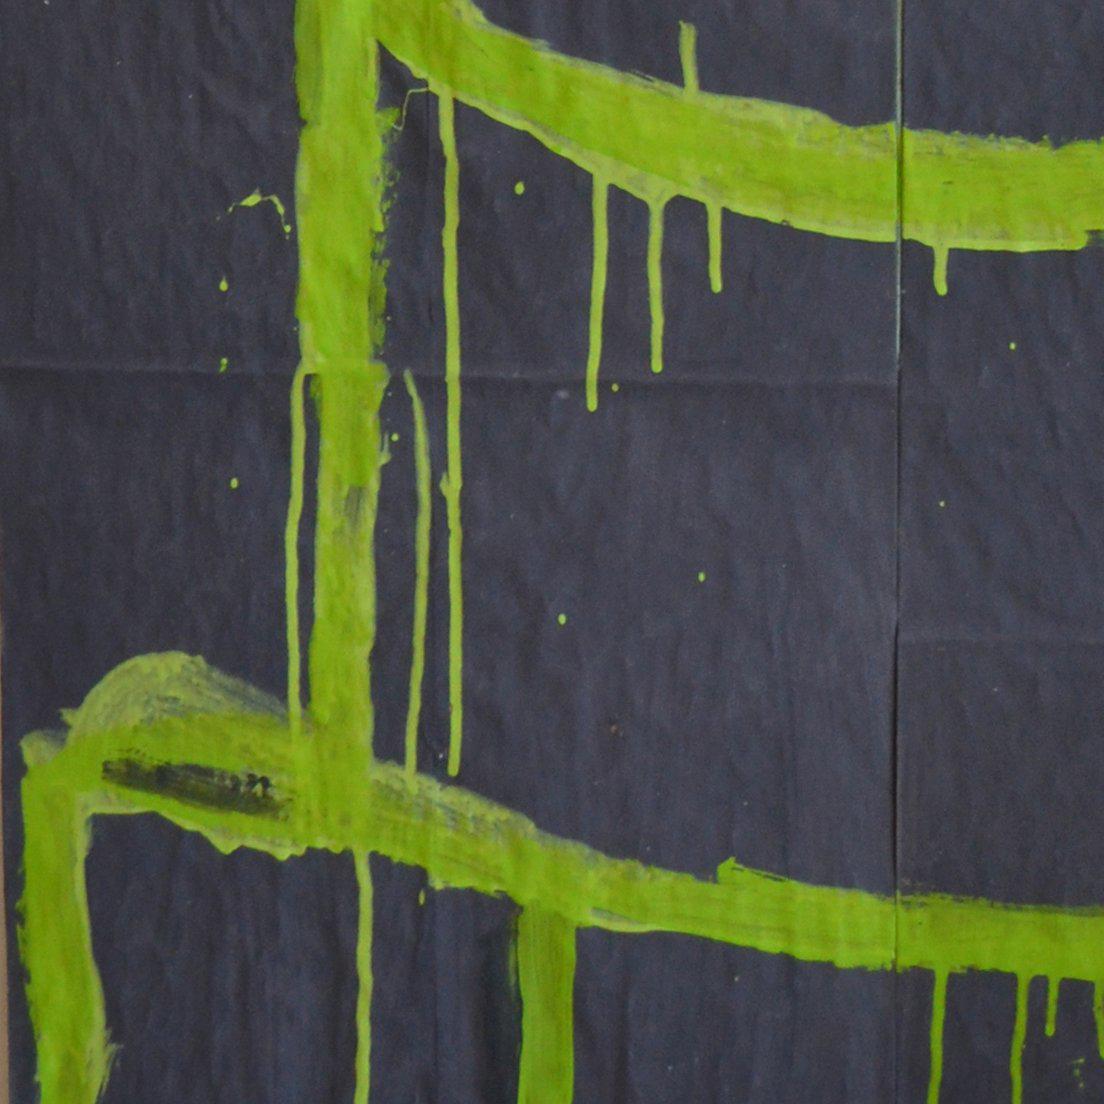 Mixed media painting of cake, Gary Komarin, Cake 5 (Lime on Charcoal ) 2